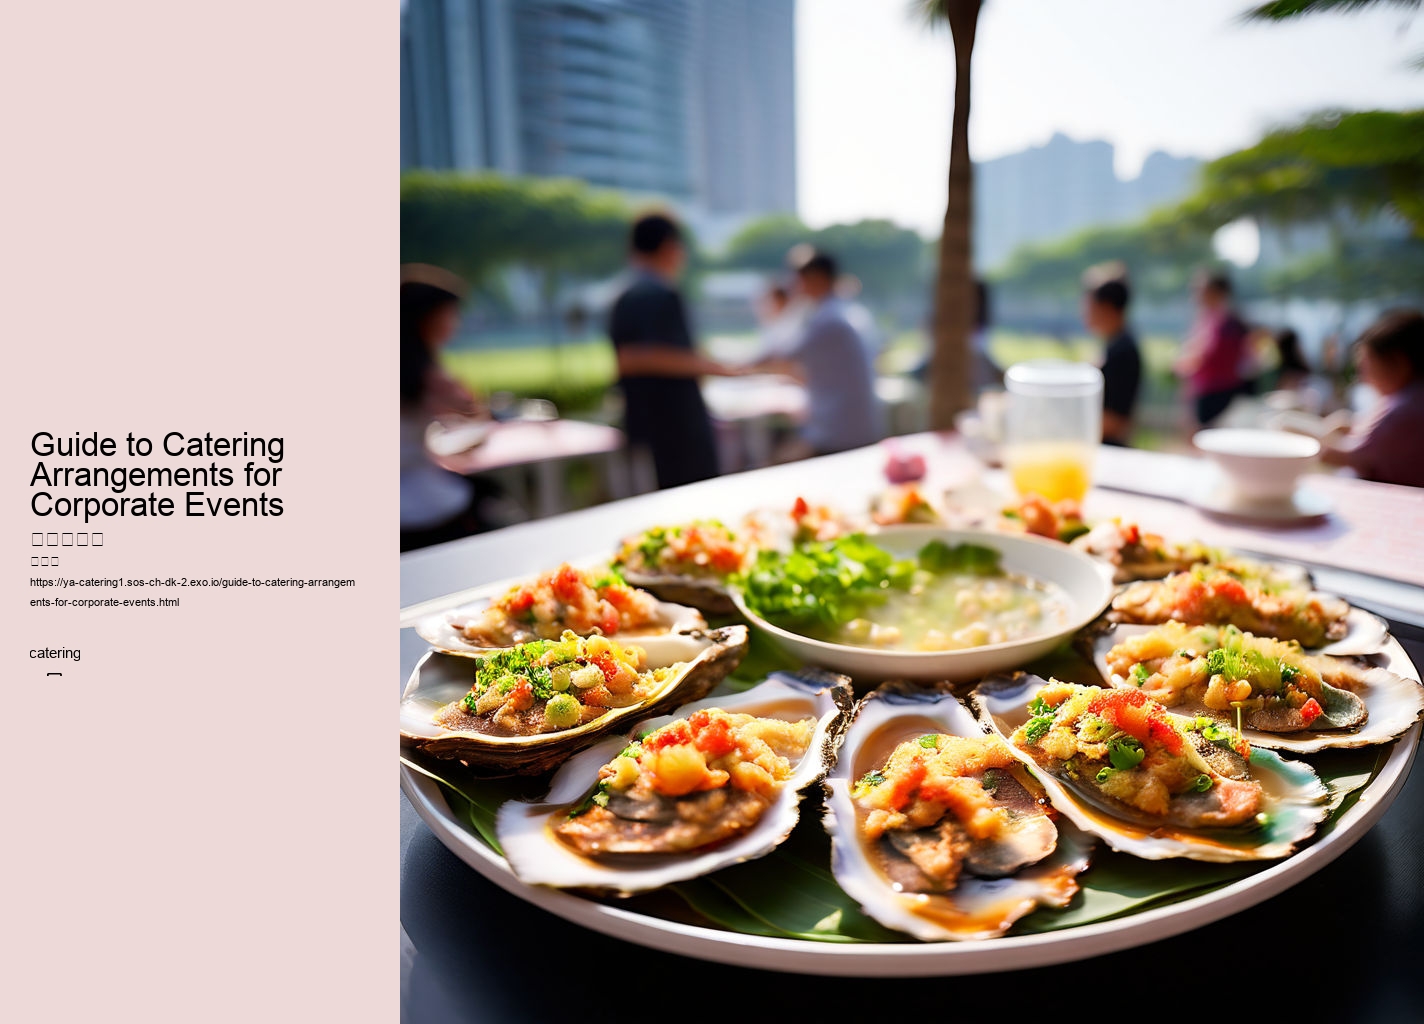 Guide to Catering Arrangements for Corporate Events